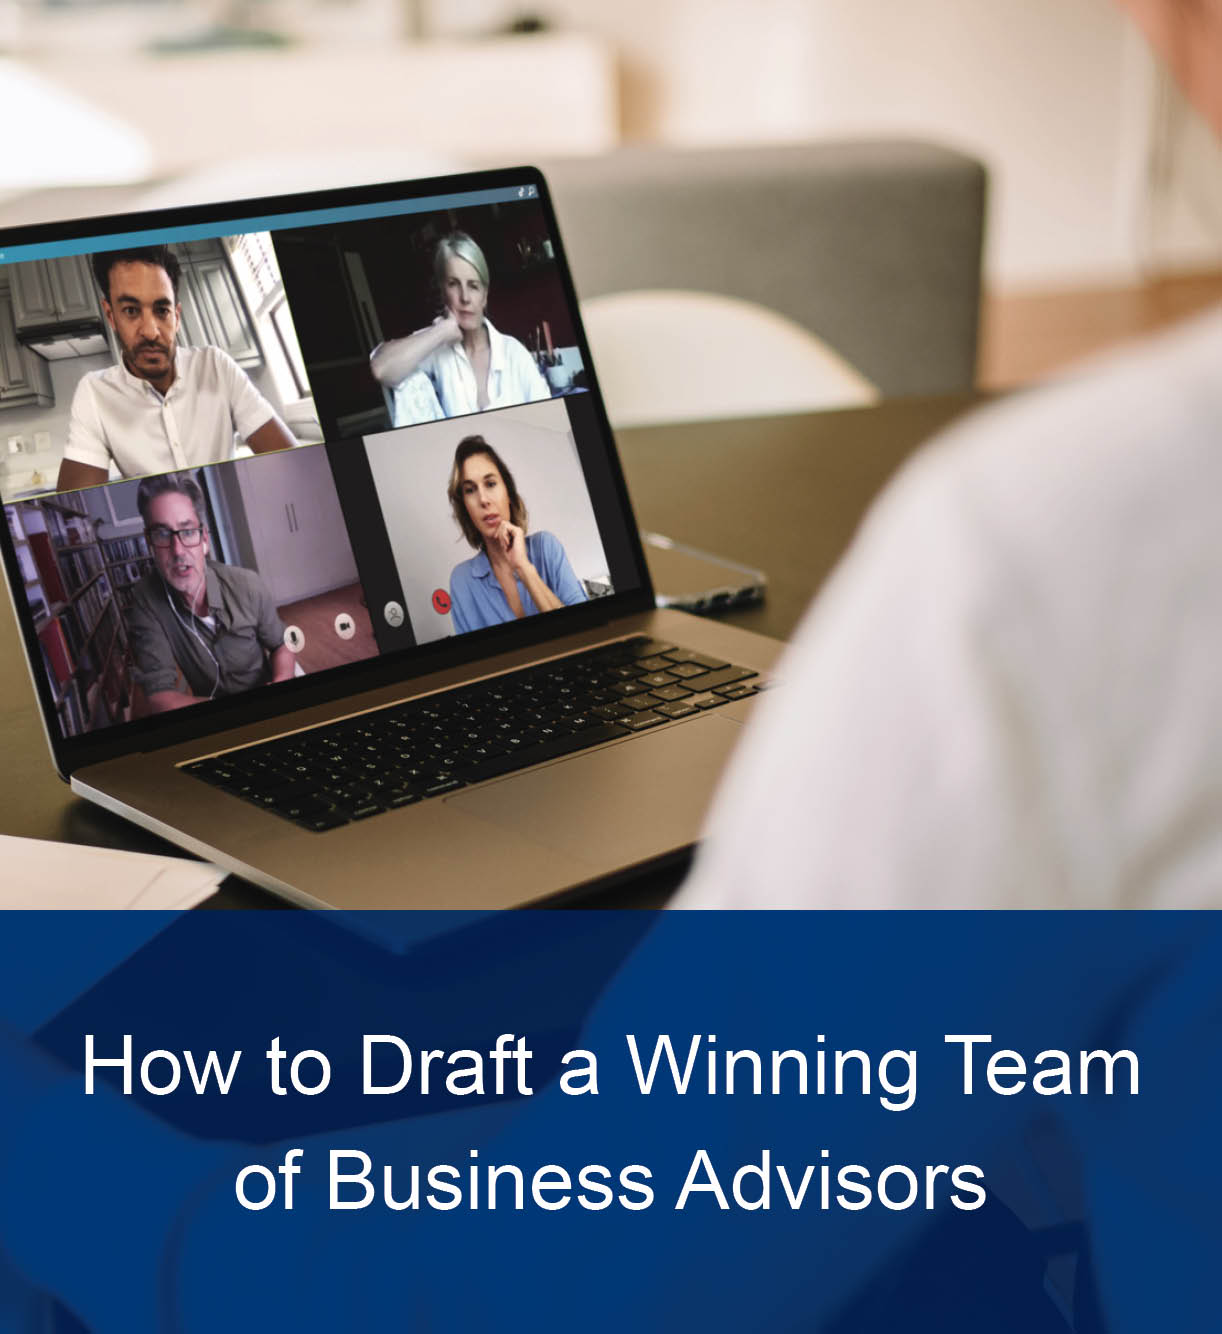 How to Draft a Winning Team of Business Advisors thumbnail image